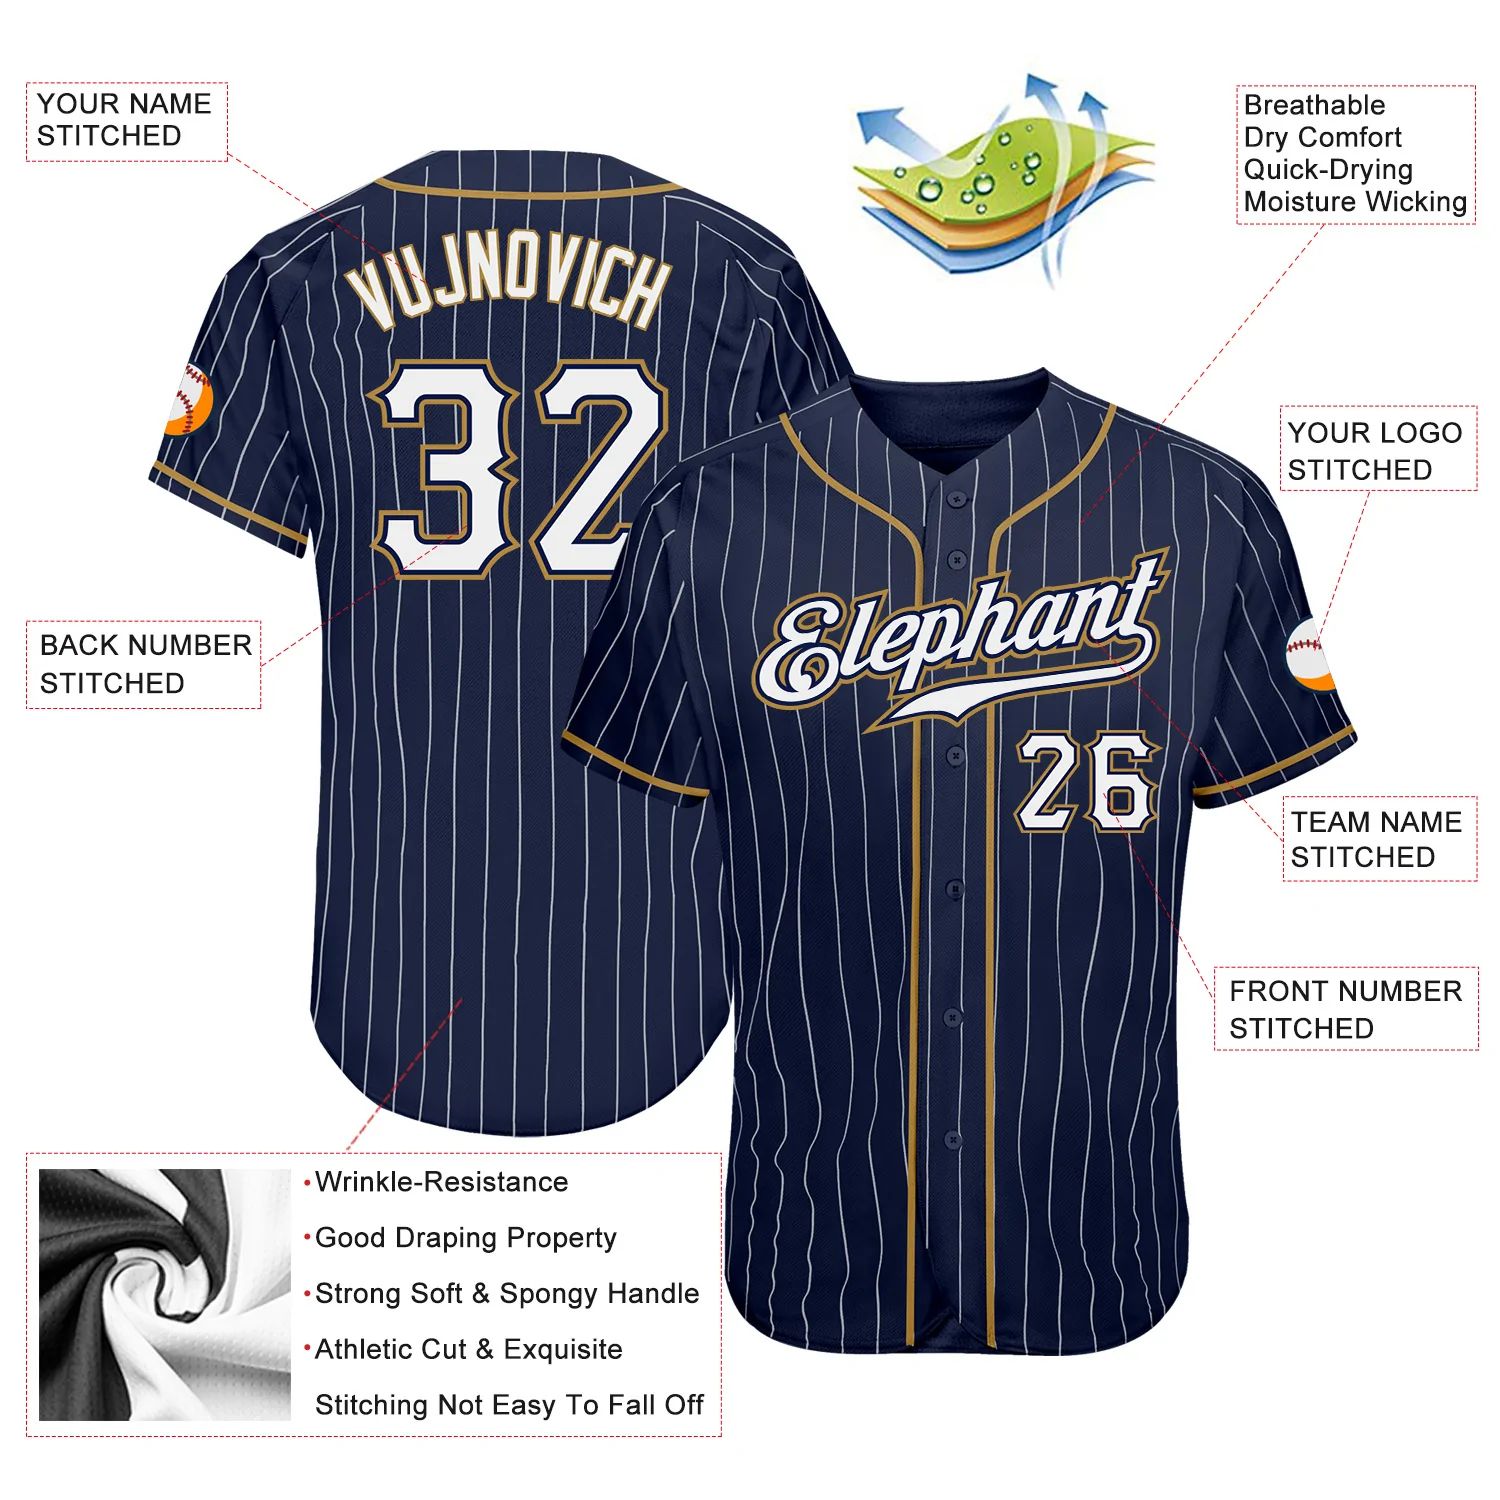 build-old-gold-navy-pinstripe-baseball-white-jersey-authentic-navy0220-online-3.jpg